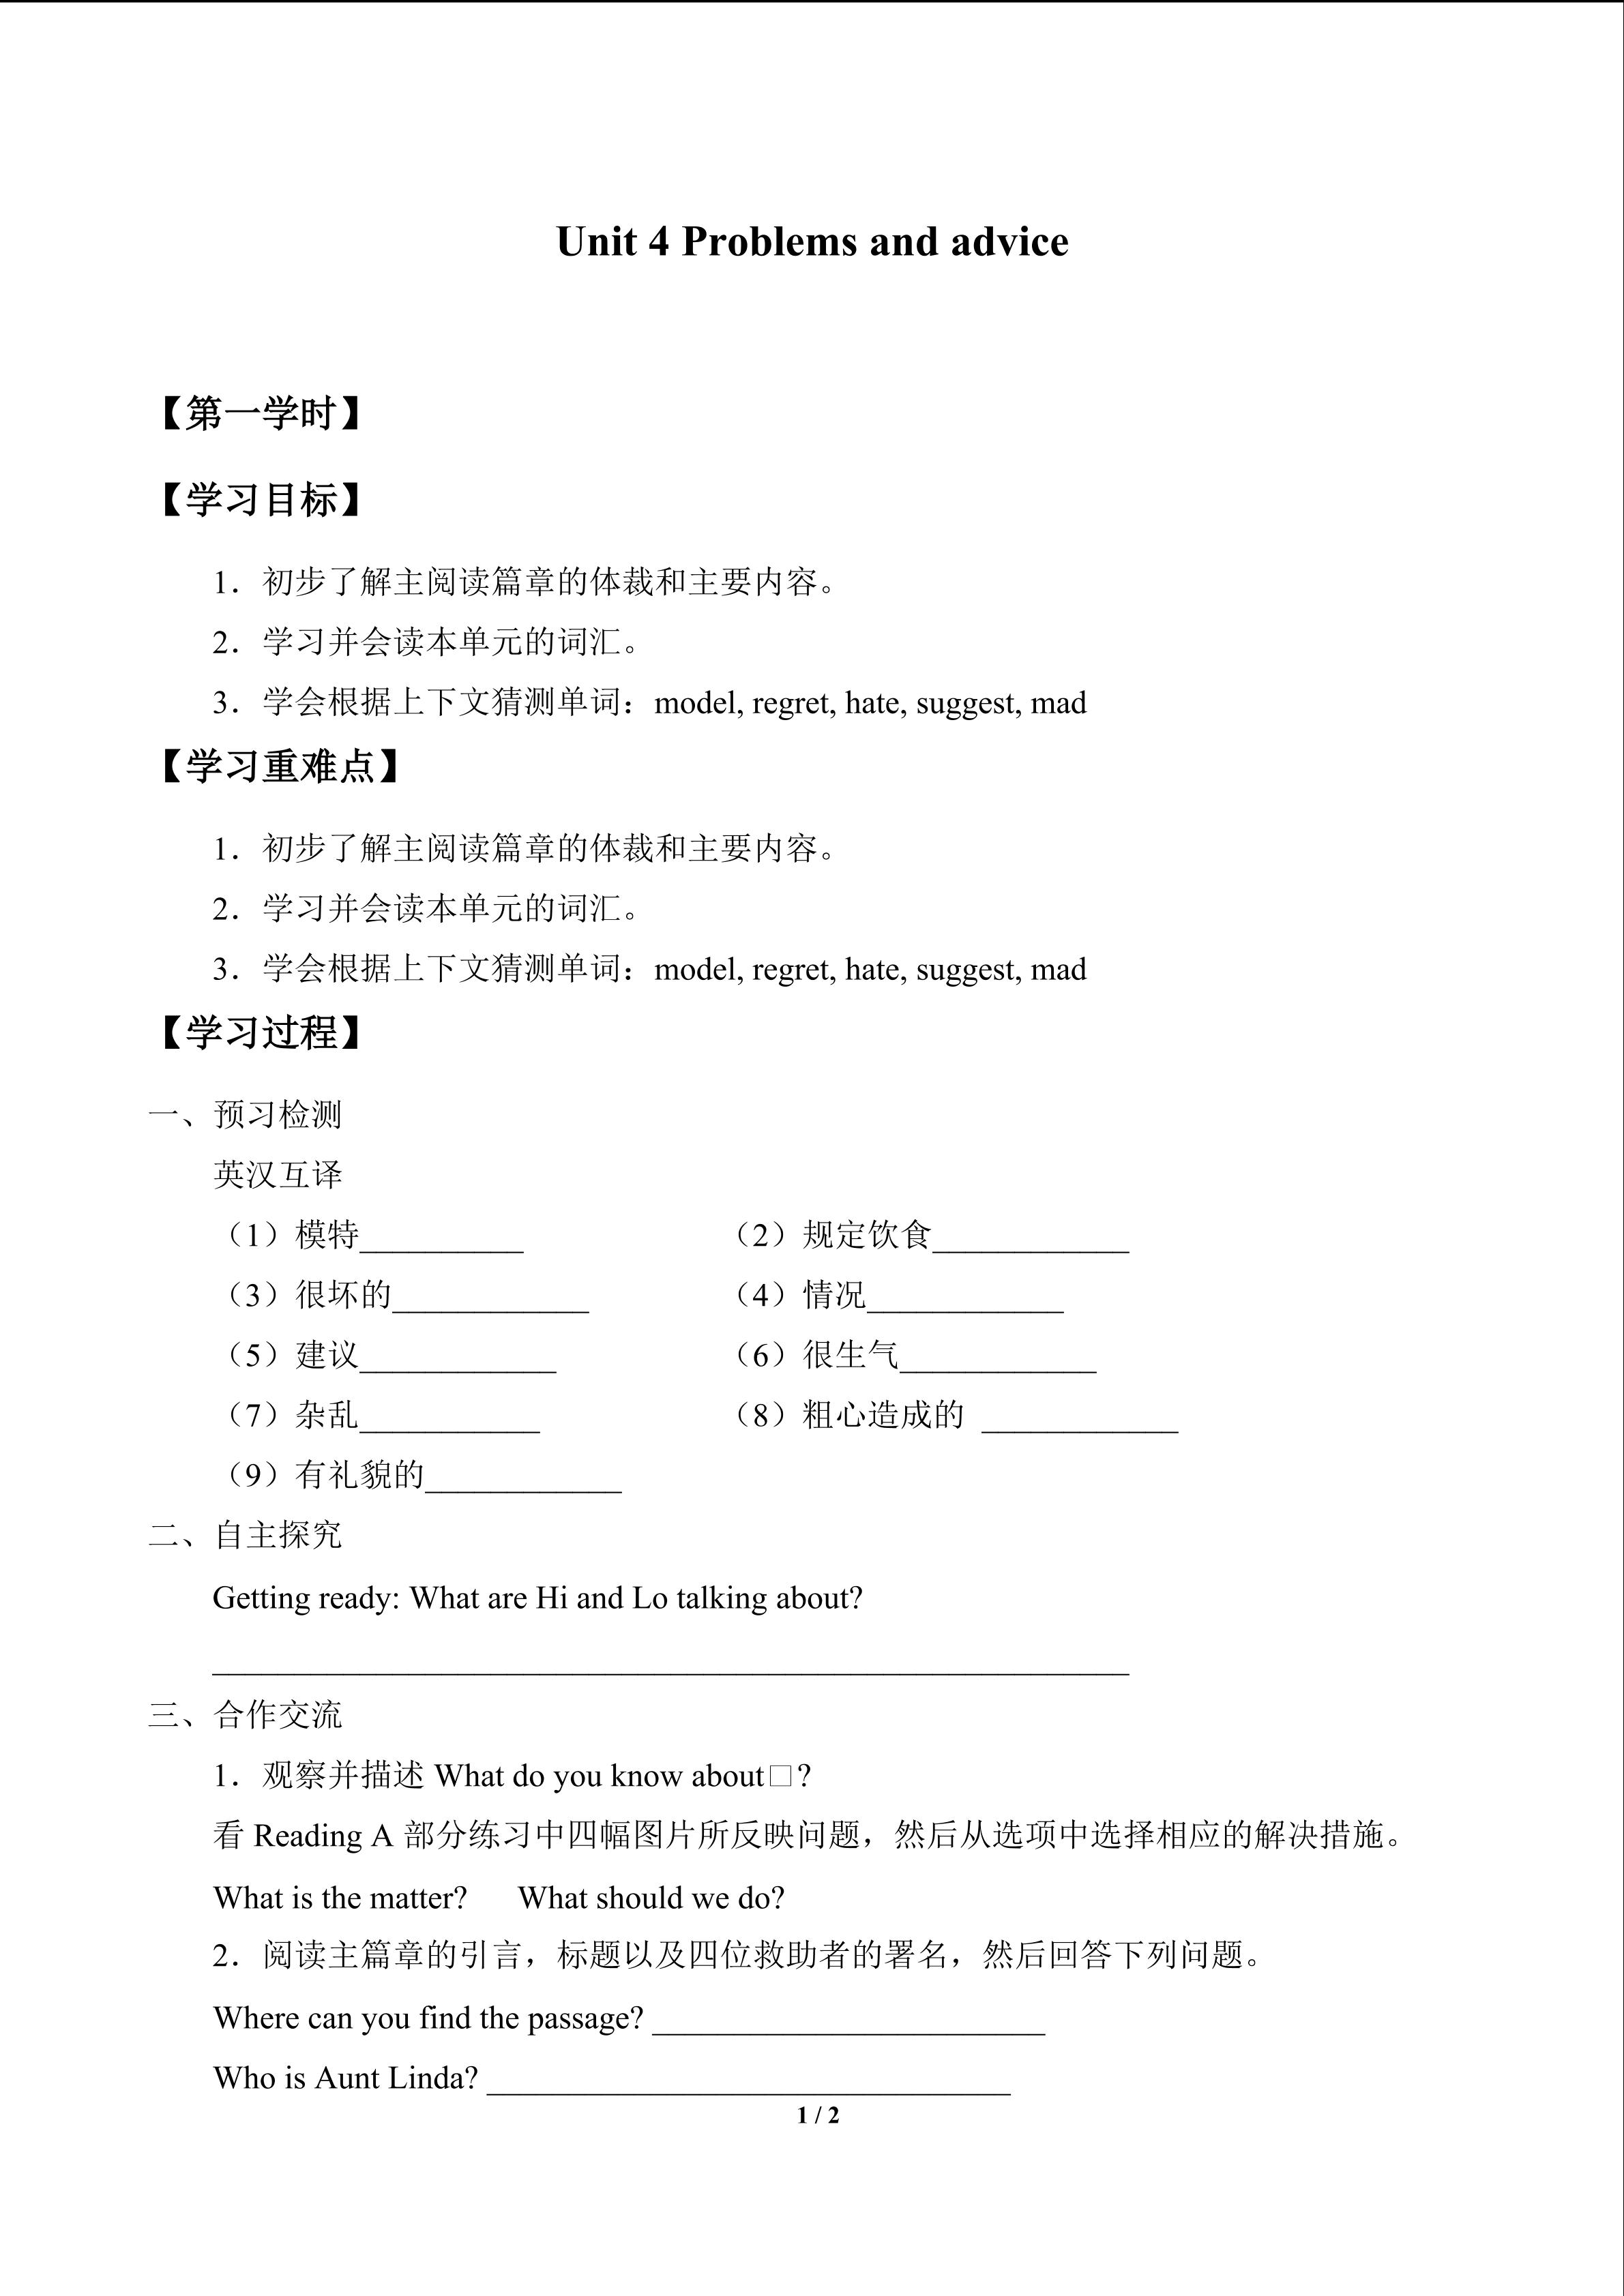 Unit  4  Problems and advice_学案1